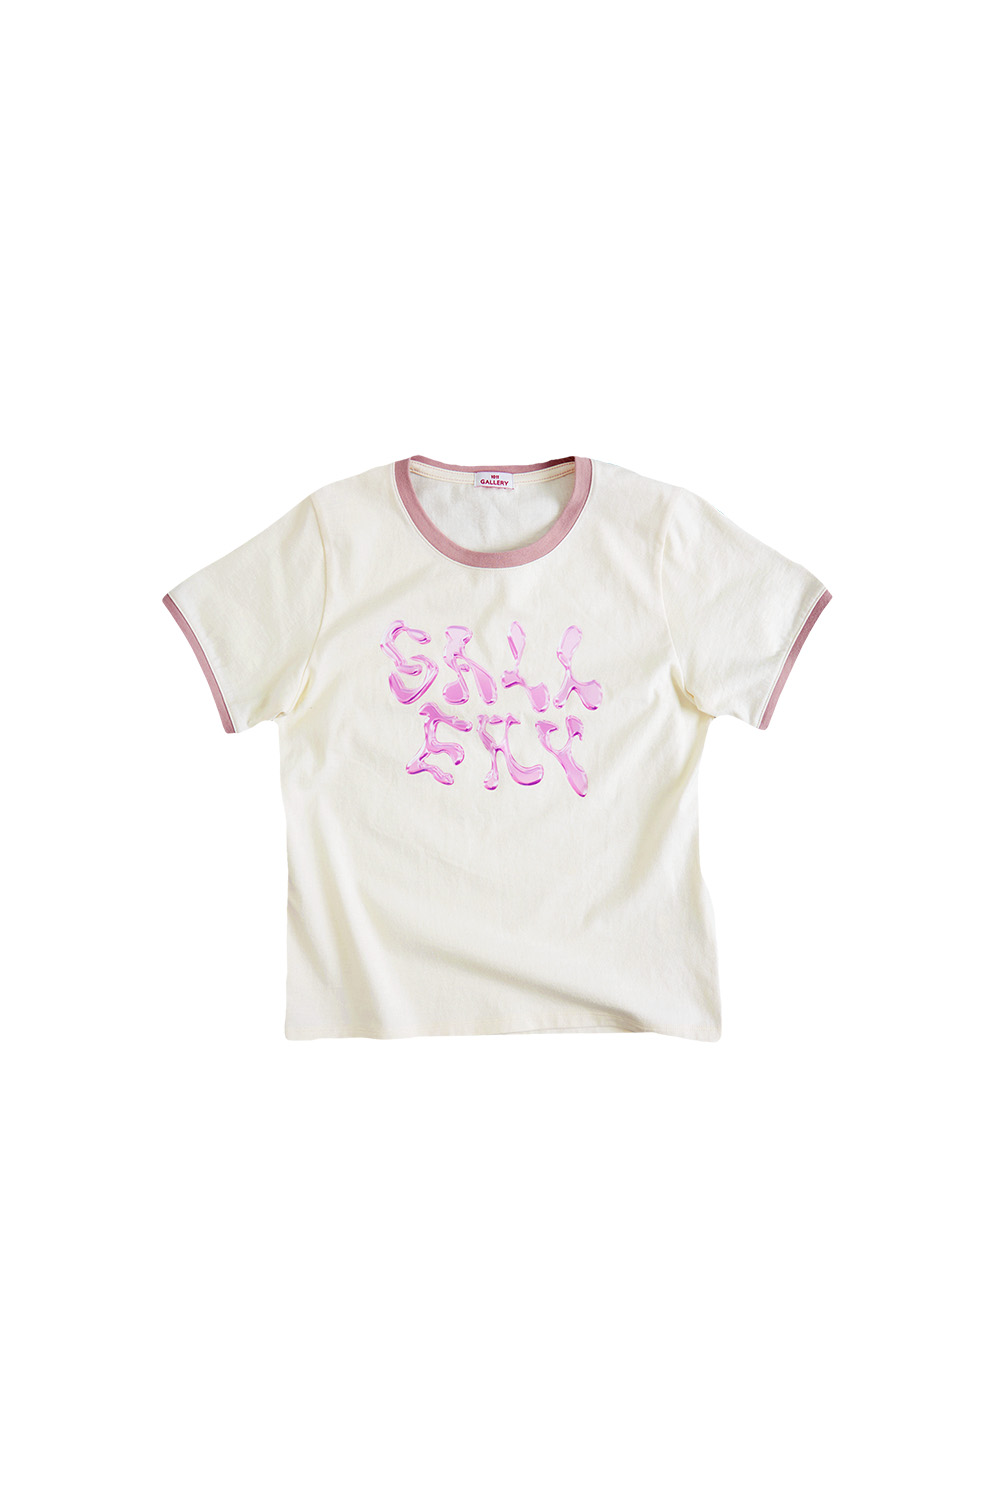 Gallery Baby Ringer T-shirt - Pink